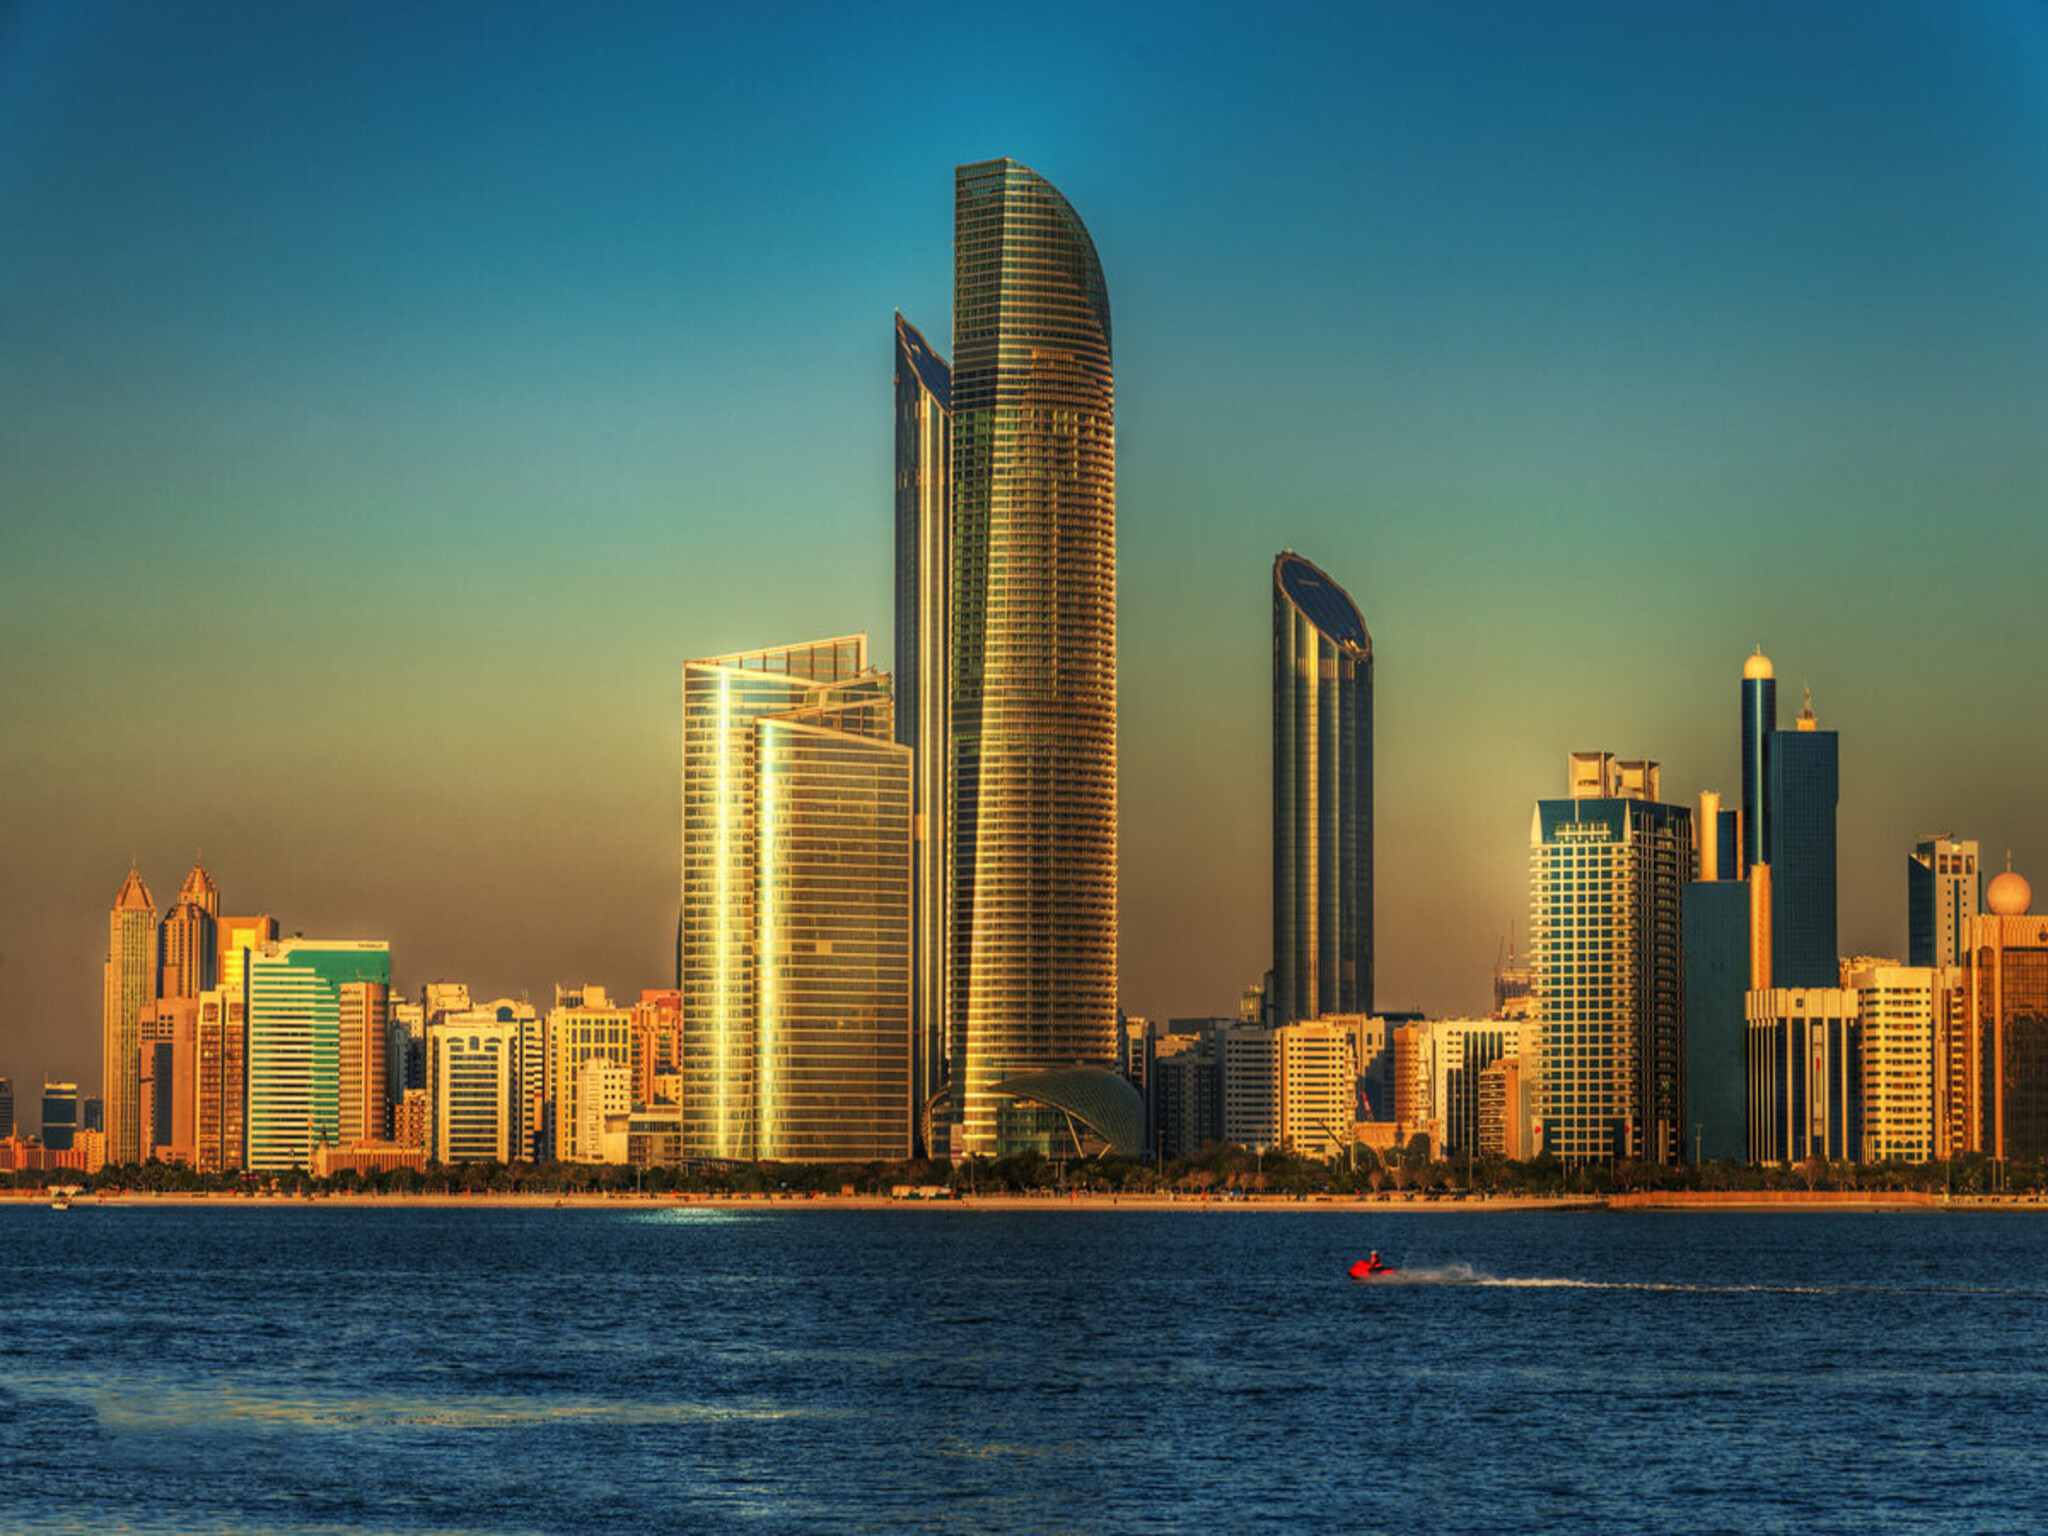 The Emirates announces the launch of the annual investment meeting in Abu Dhabi tomorrow